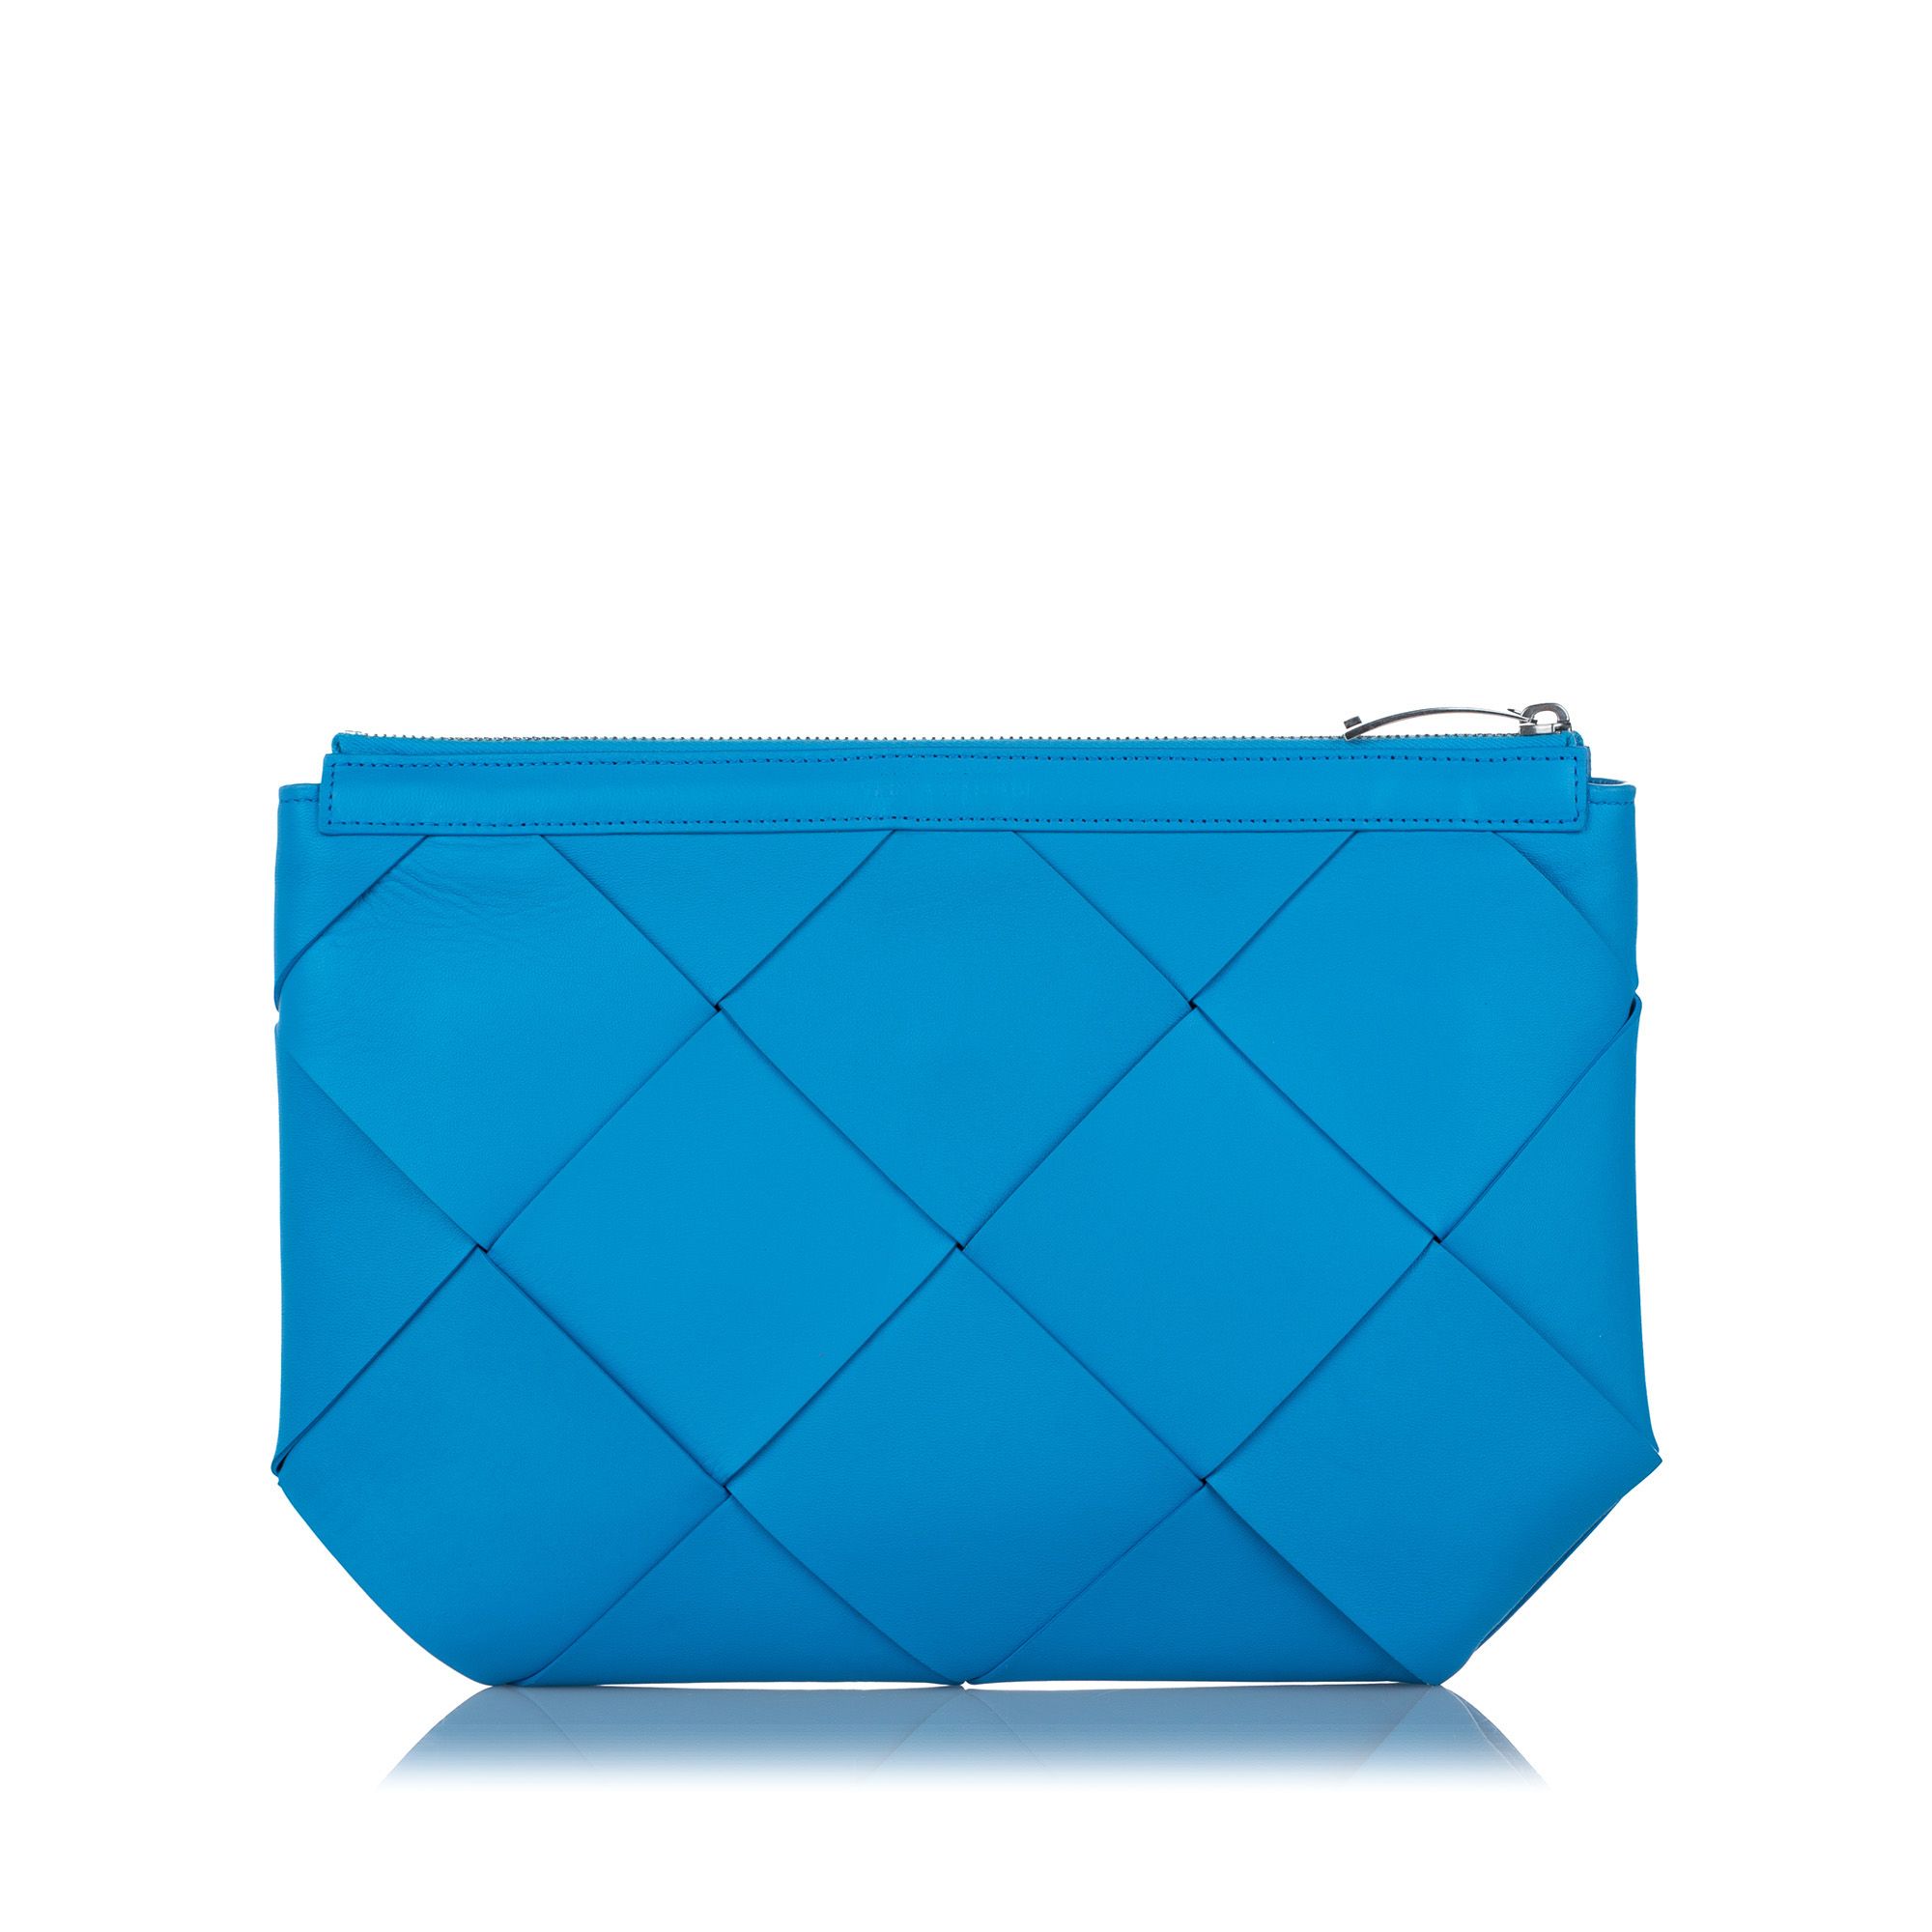 VINTAGE. RRP AS NEW. The Intrecciato clutch bag features a woven leather body and a top zip closure.
Dimensions:
Length 23cm
Width 33cm
Depth 2cm

Original Accessories: Dust Bag

Serial Number: PO1106039K
Color: Blue
Material: Leather x Calf
Country of Origin: ITALY
Boutique Reference: SSU102505K1342


Product Rating: GoodCondition